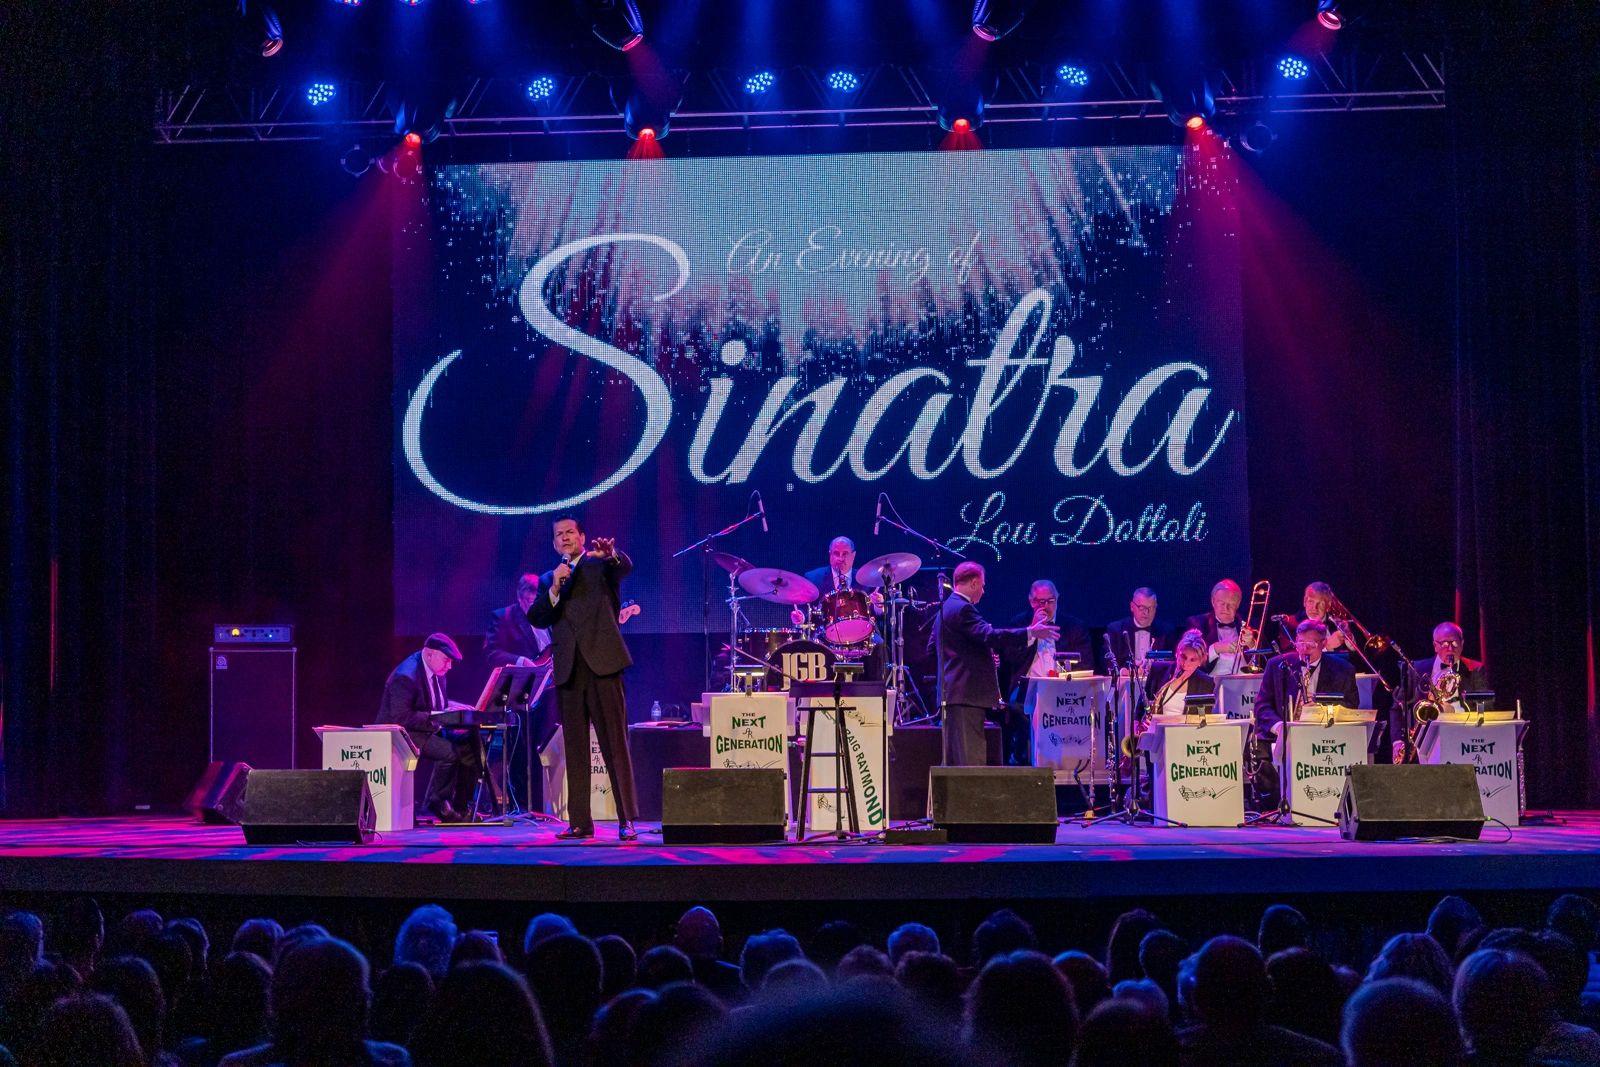 Sinatra Singer entertainer Lou Dottoli performing in concert with his big band.